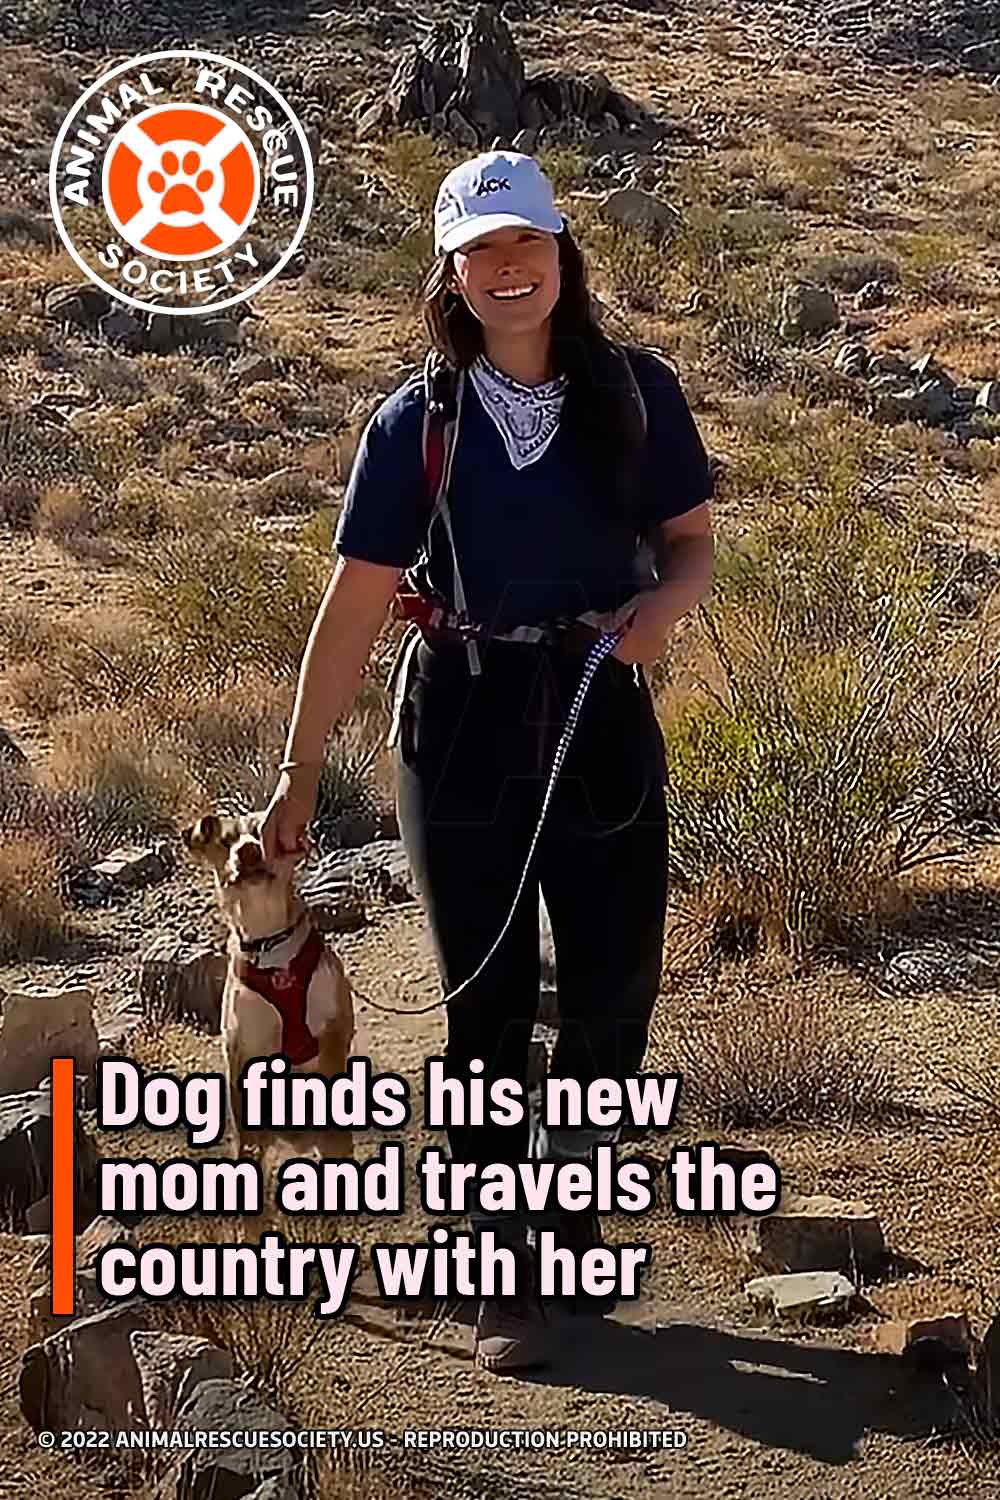 Dog finds his new mom and travels the country with her